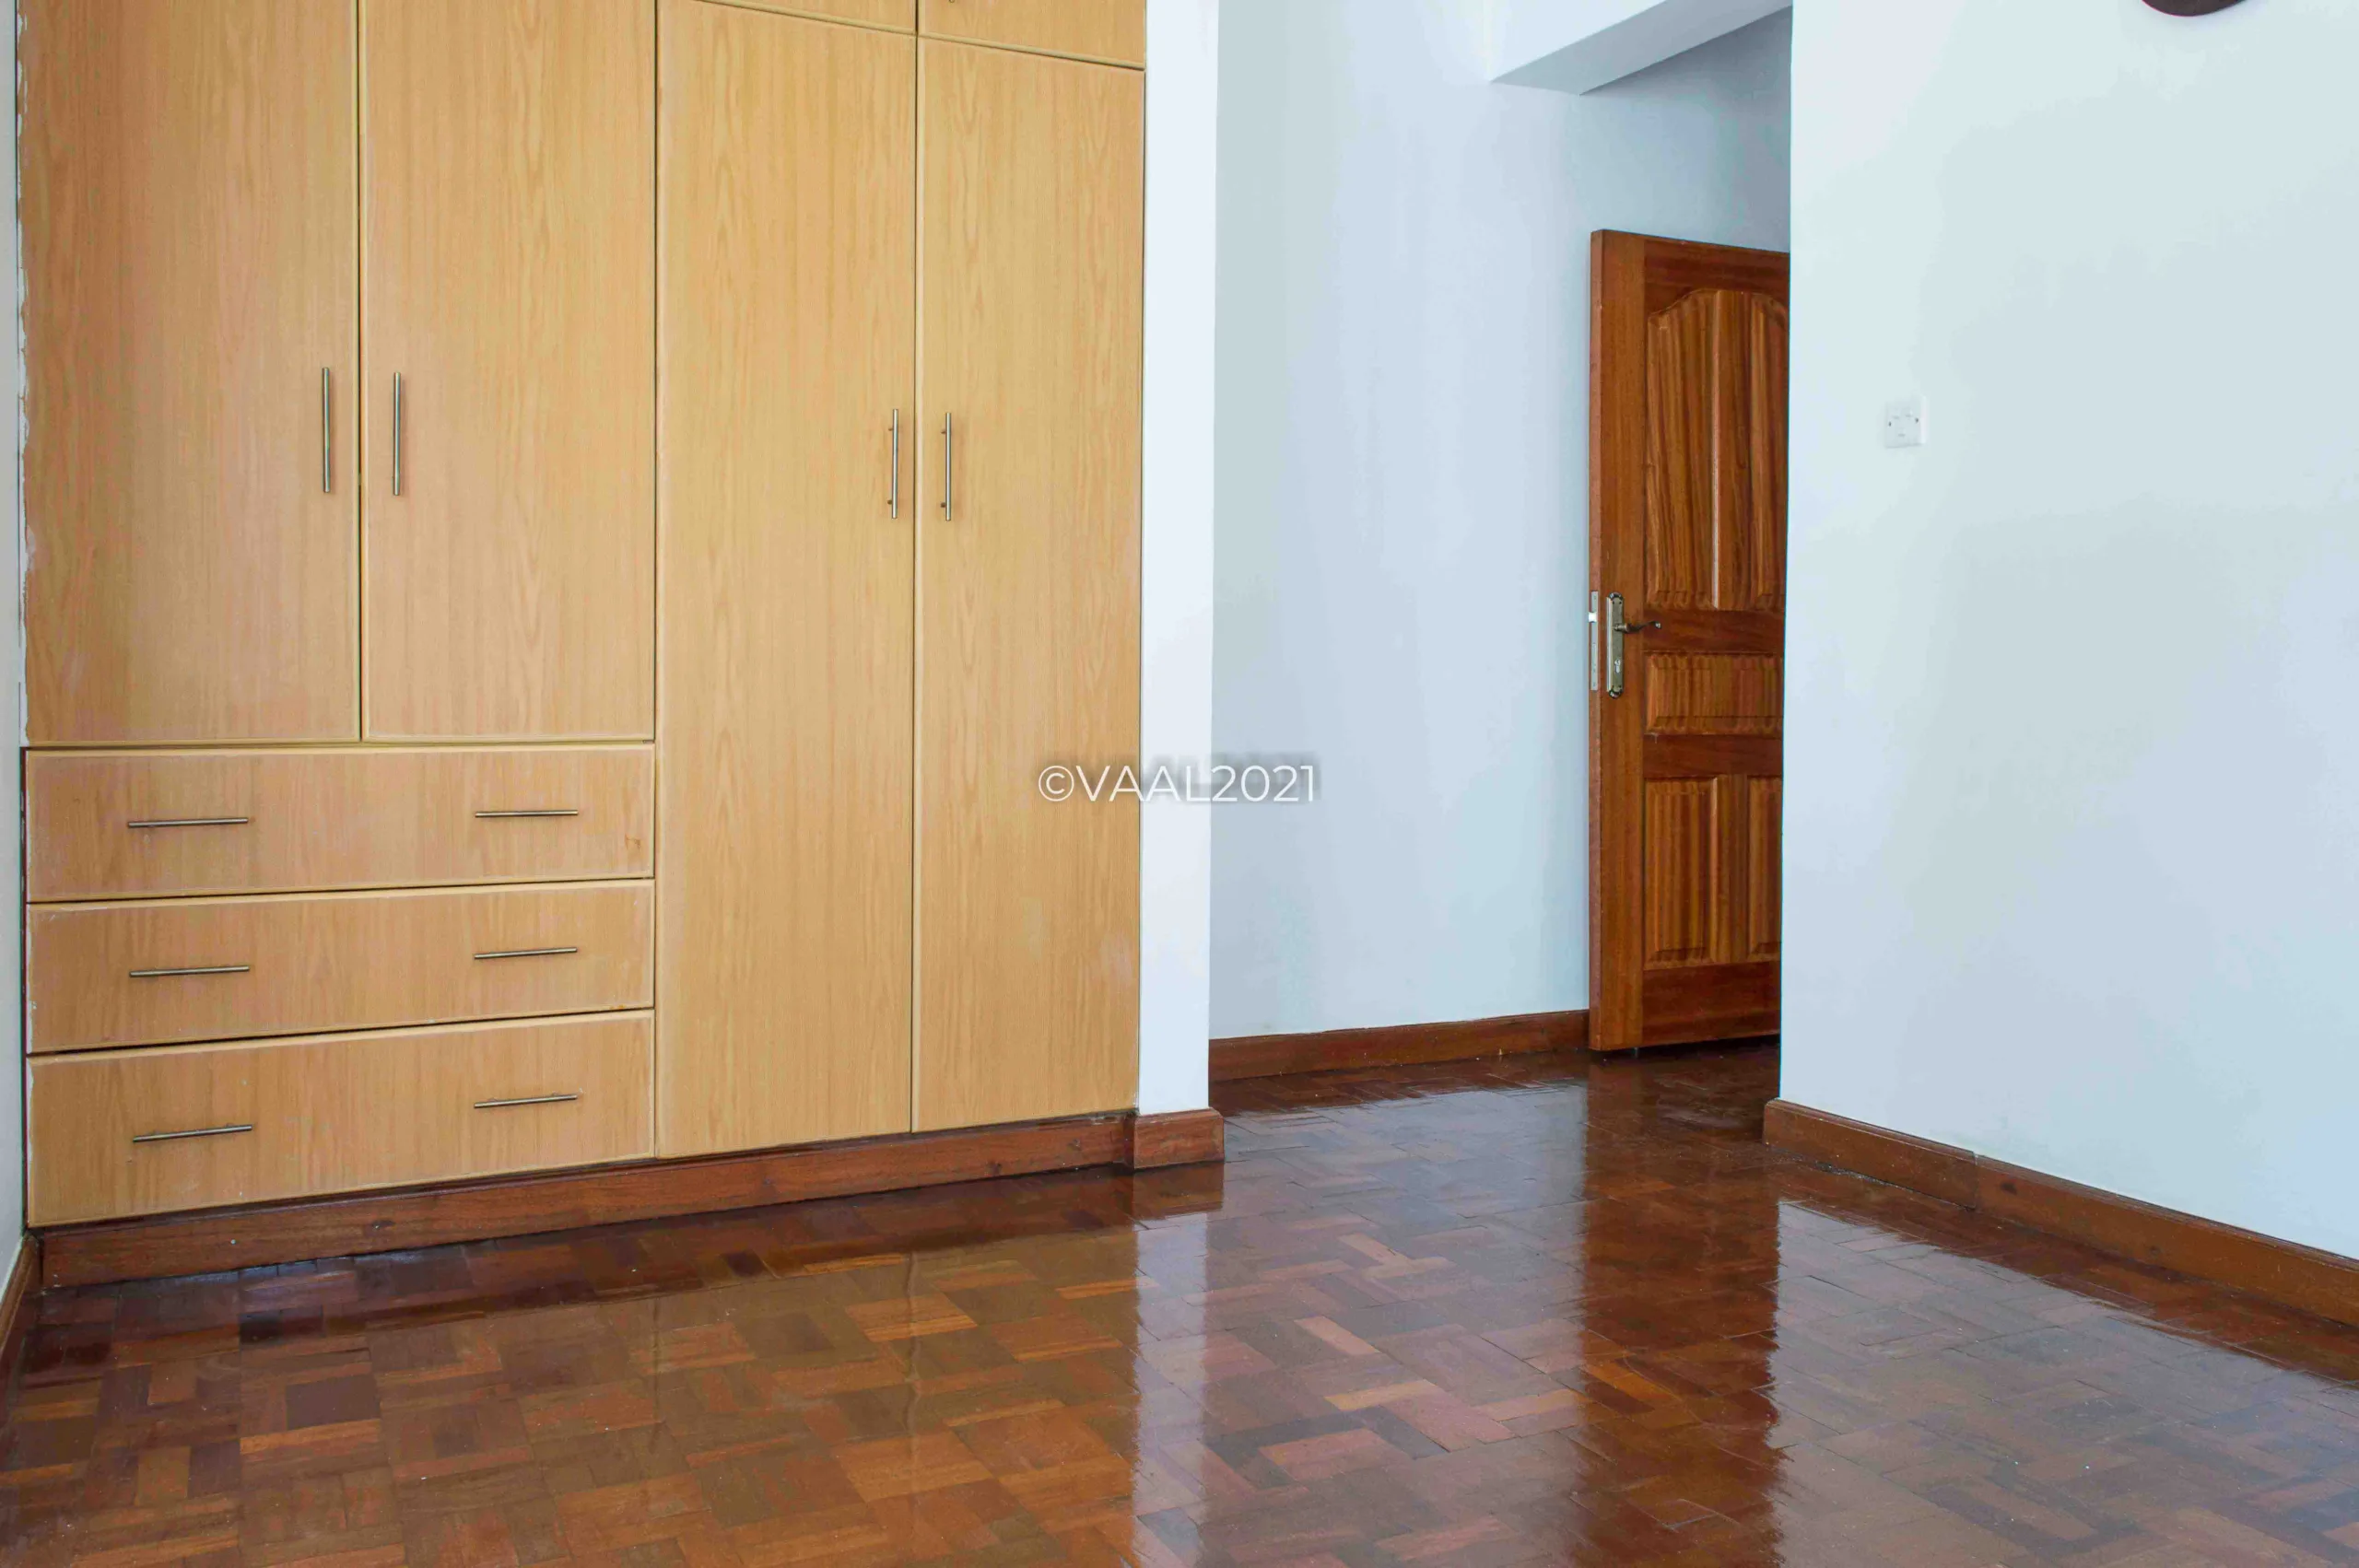 Unfurnished apartments for rent in Westlands